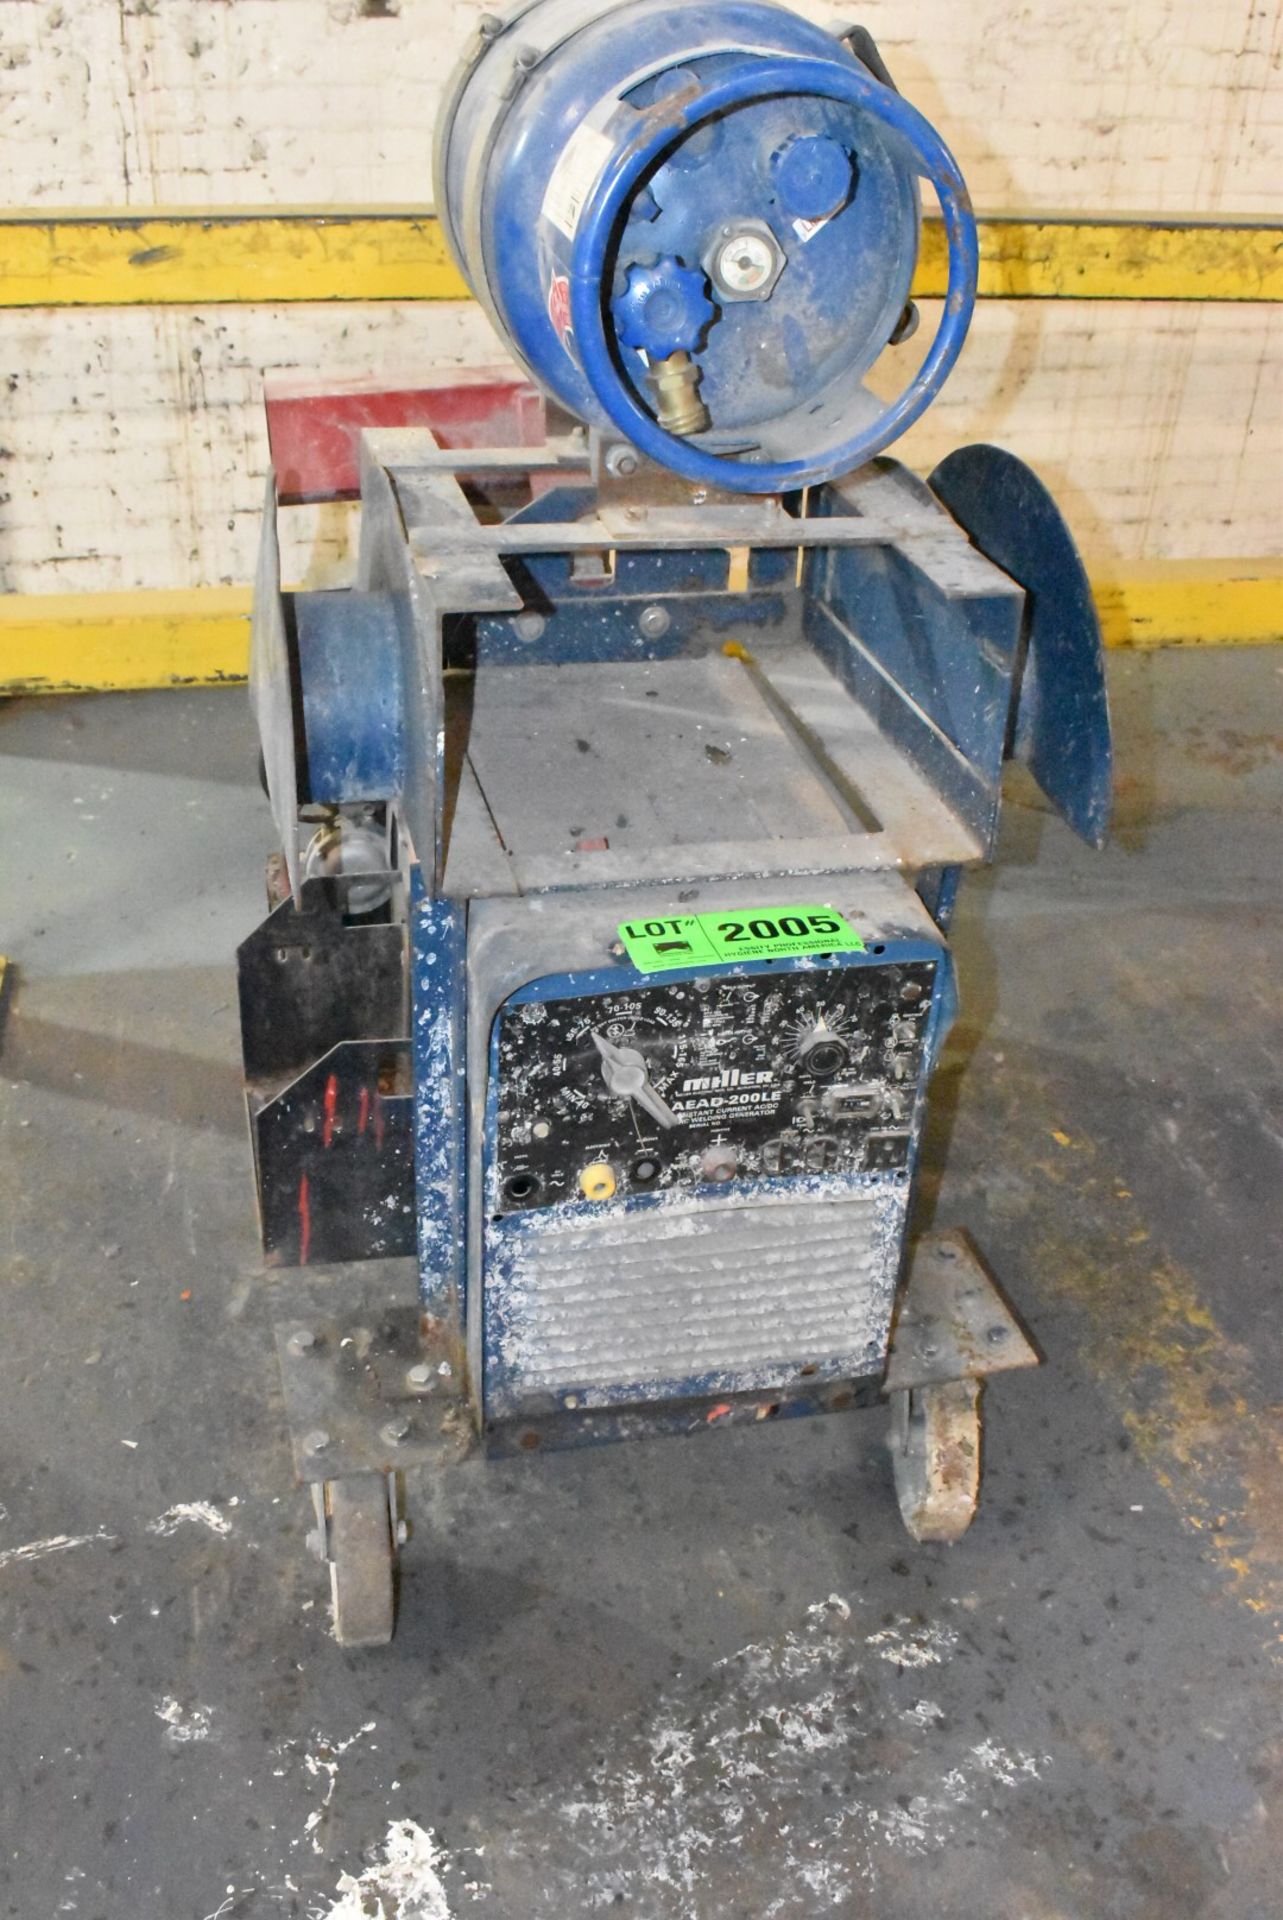 MILLER AEAD-200LE LPG POWERED CONSTANT CURRENT AC/DC WELDER GENERATOR WITH CART, 1961 HOURS RECORDED